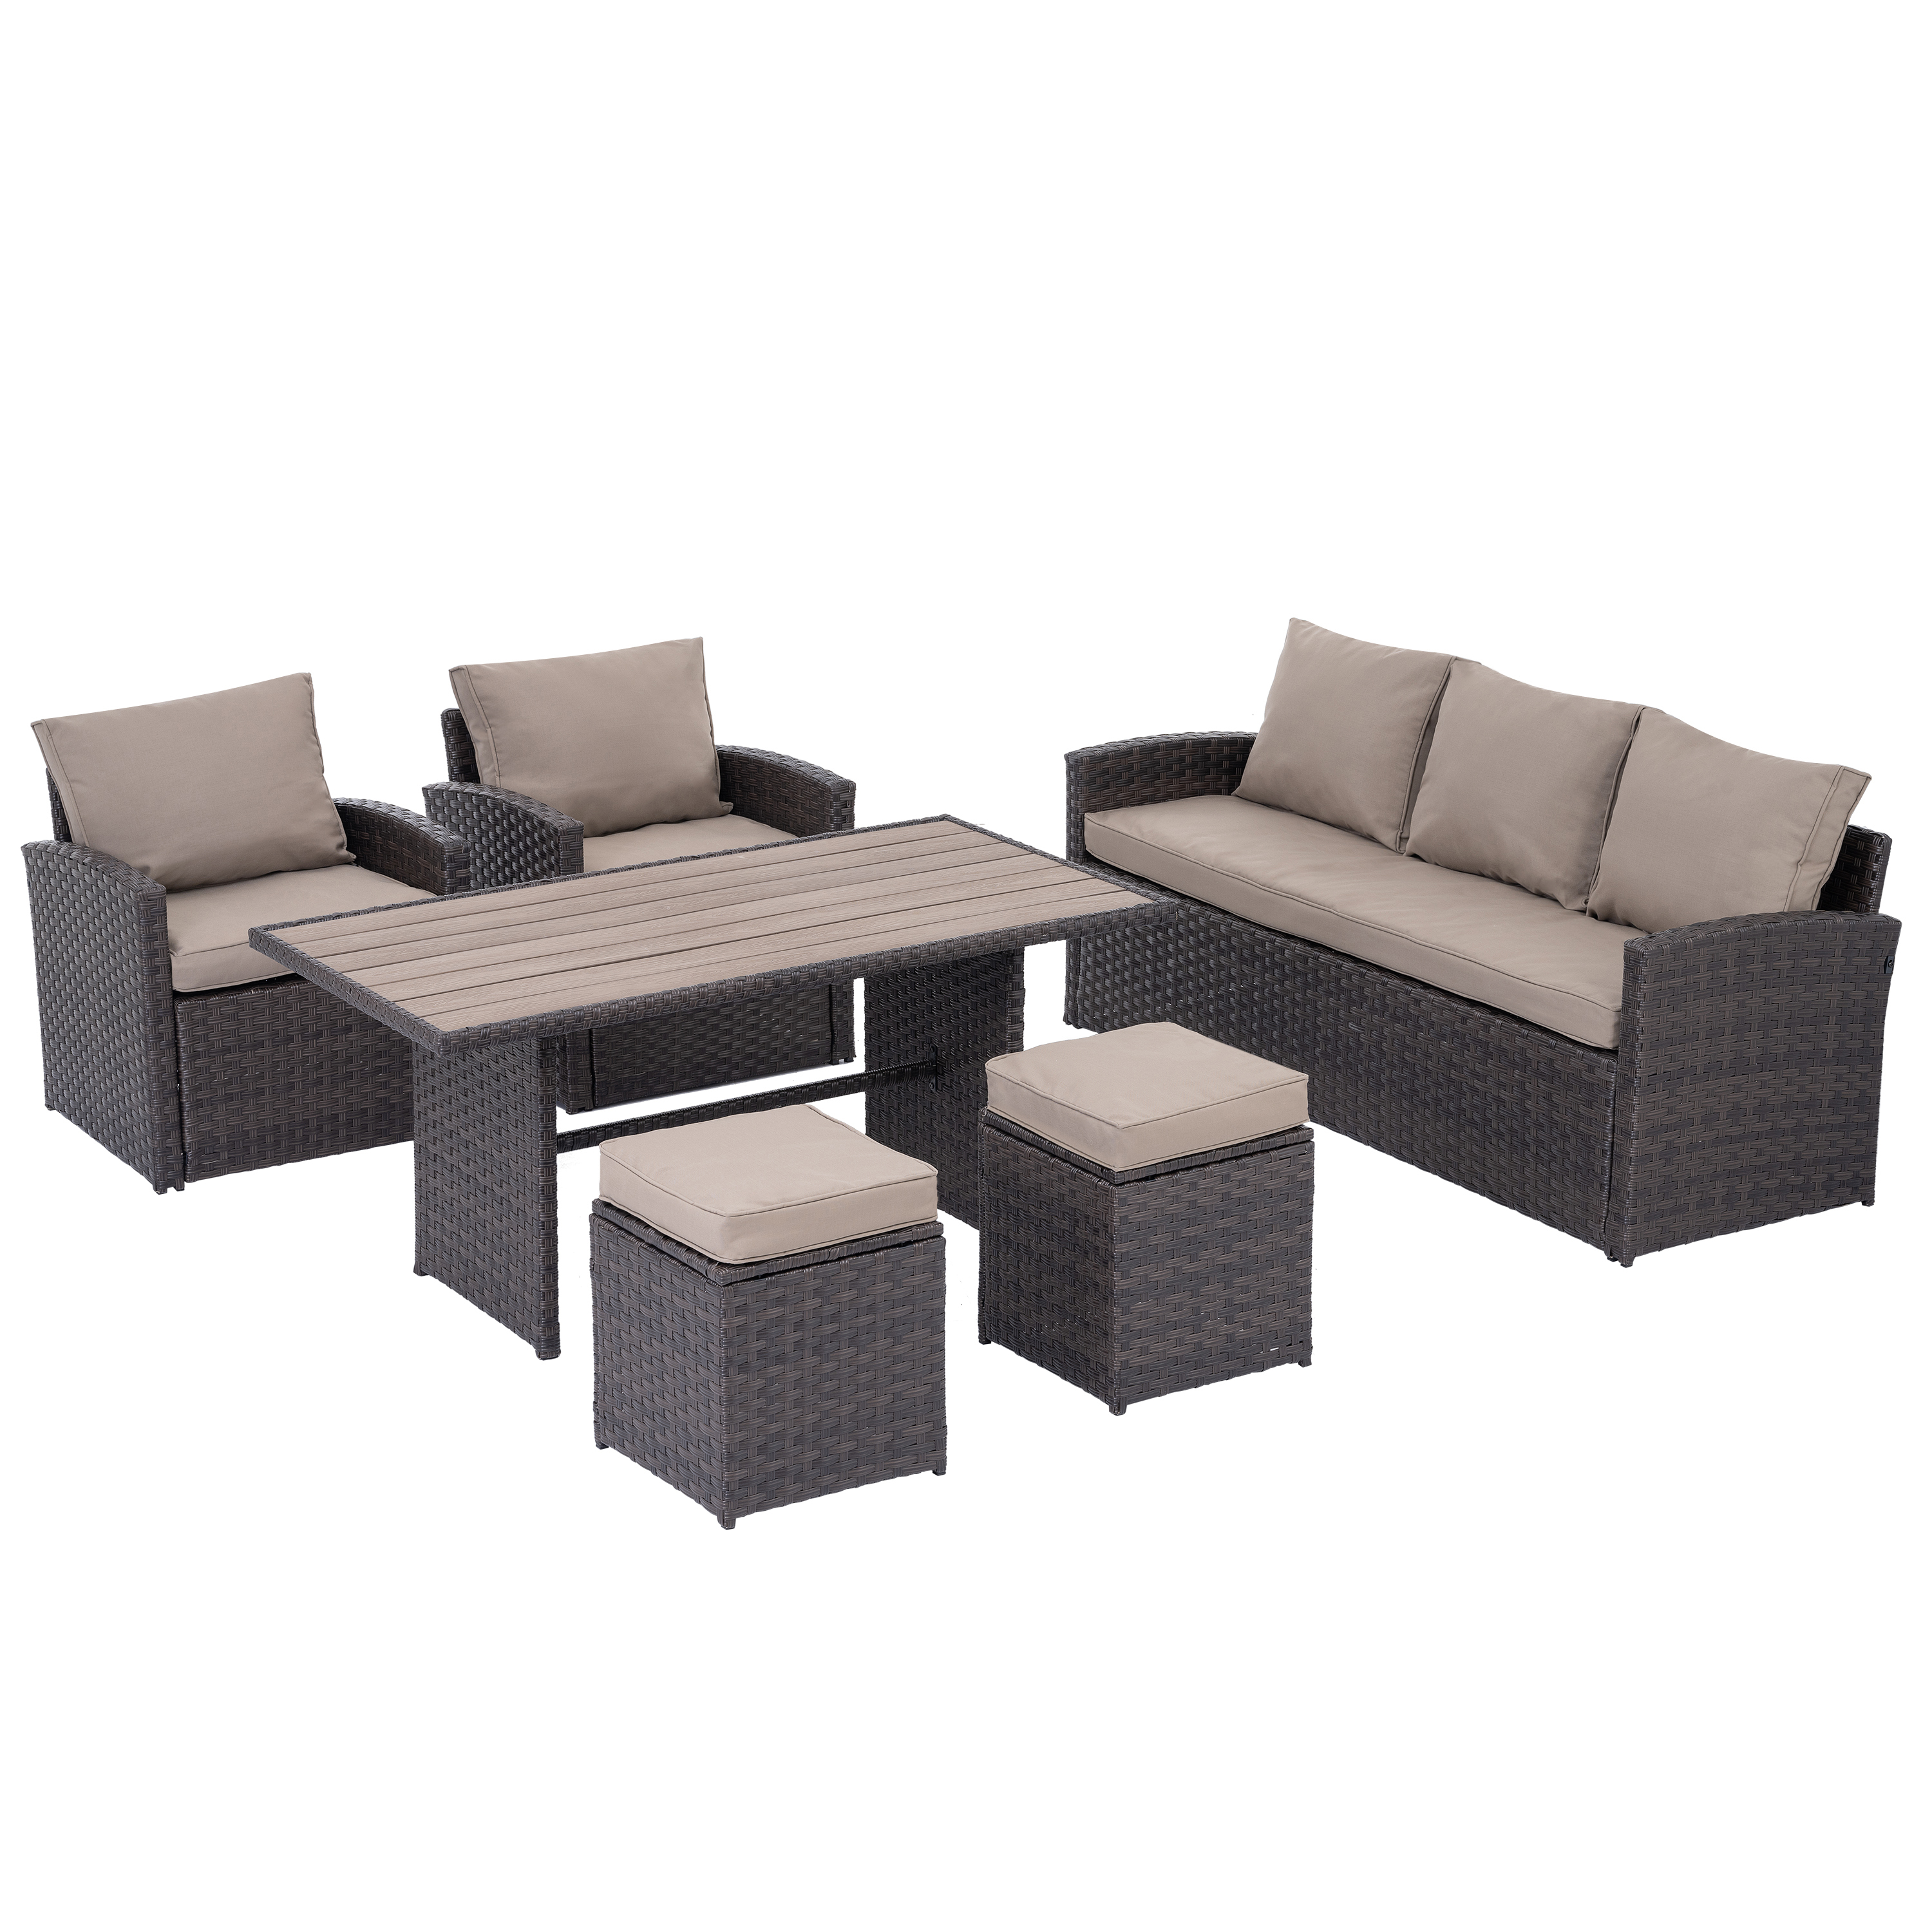 Patio Rattan Dining Table Set, 6 PCS Outdoor PE Wicker Conversation Set, Cushioned Seat Backrest Sofa with 2 Armchair Sofa, 2 Ottoman & Table, Sectional Furniture Set for Garden Porch Deck Patio - image 4 of 9